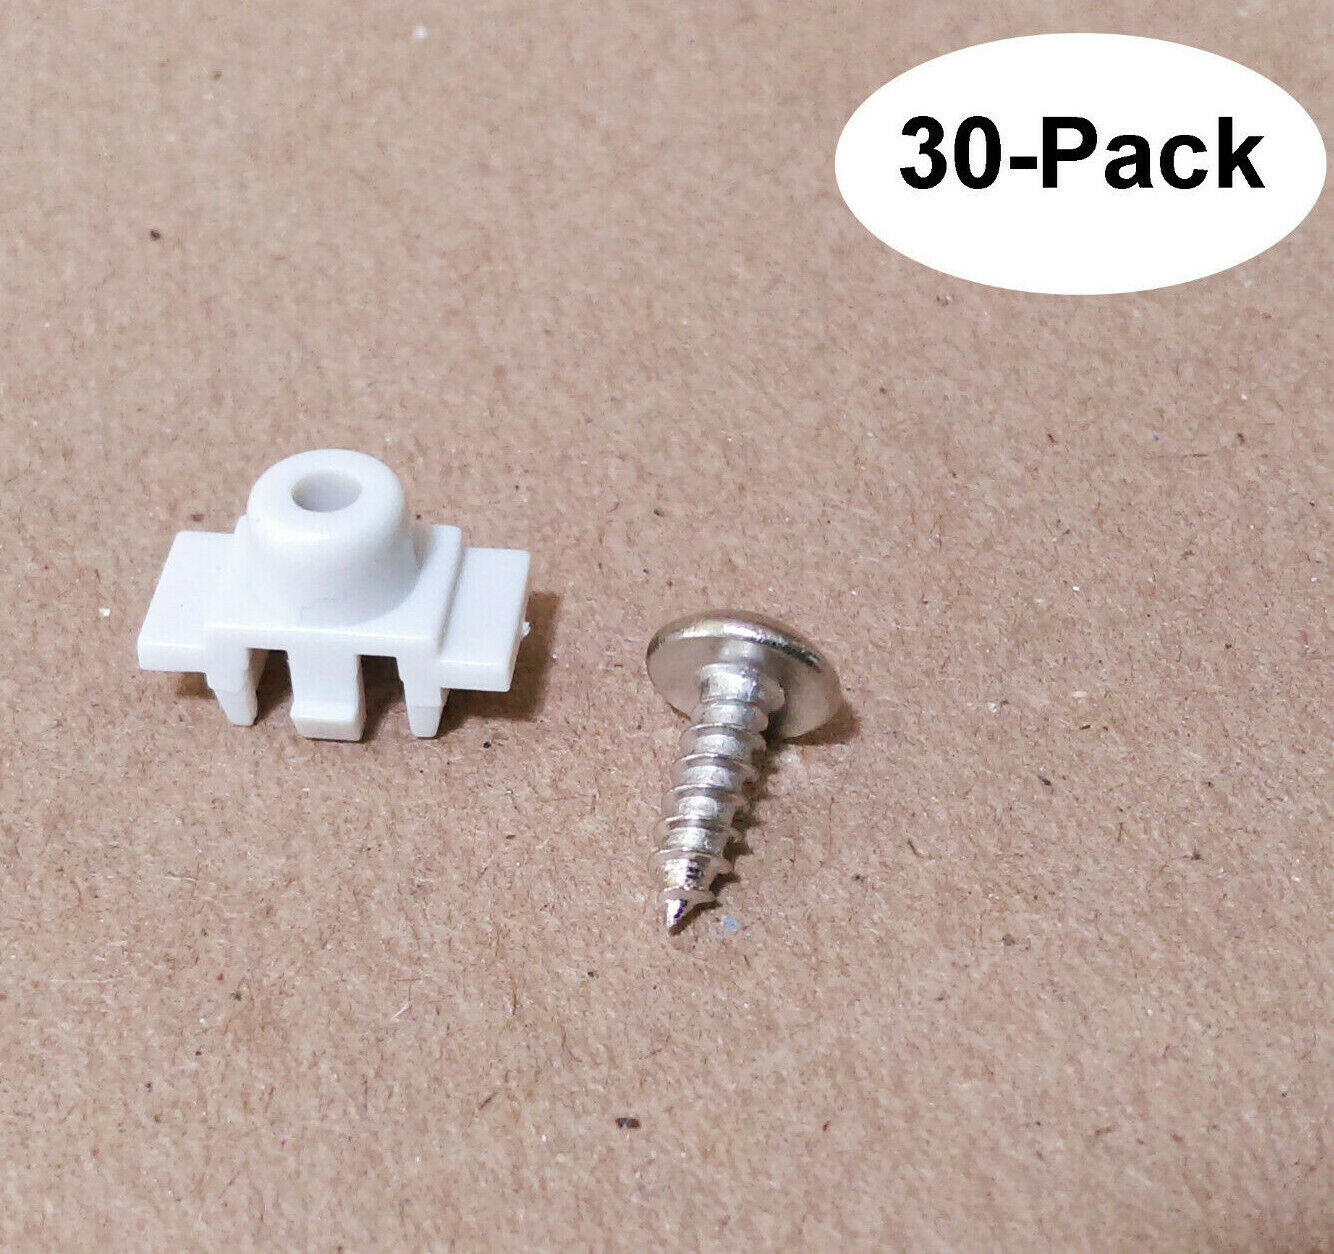 Lot of 30pcs:  Snap-In Clip Plastic Standoff/Screw for PC ATX Motherboard Mounting